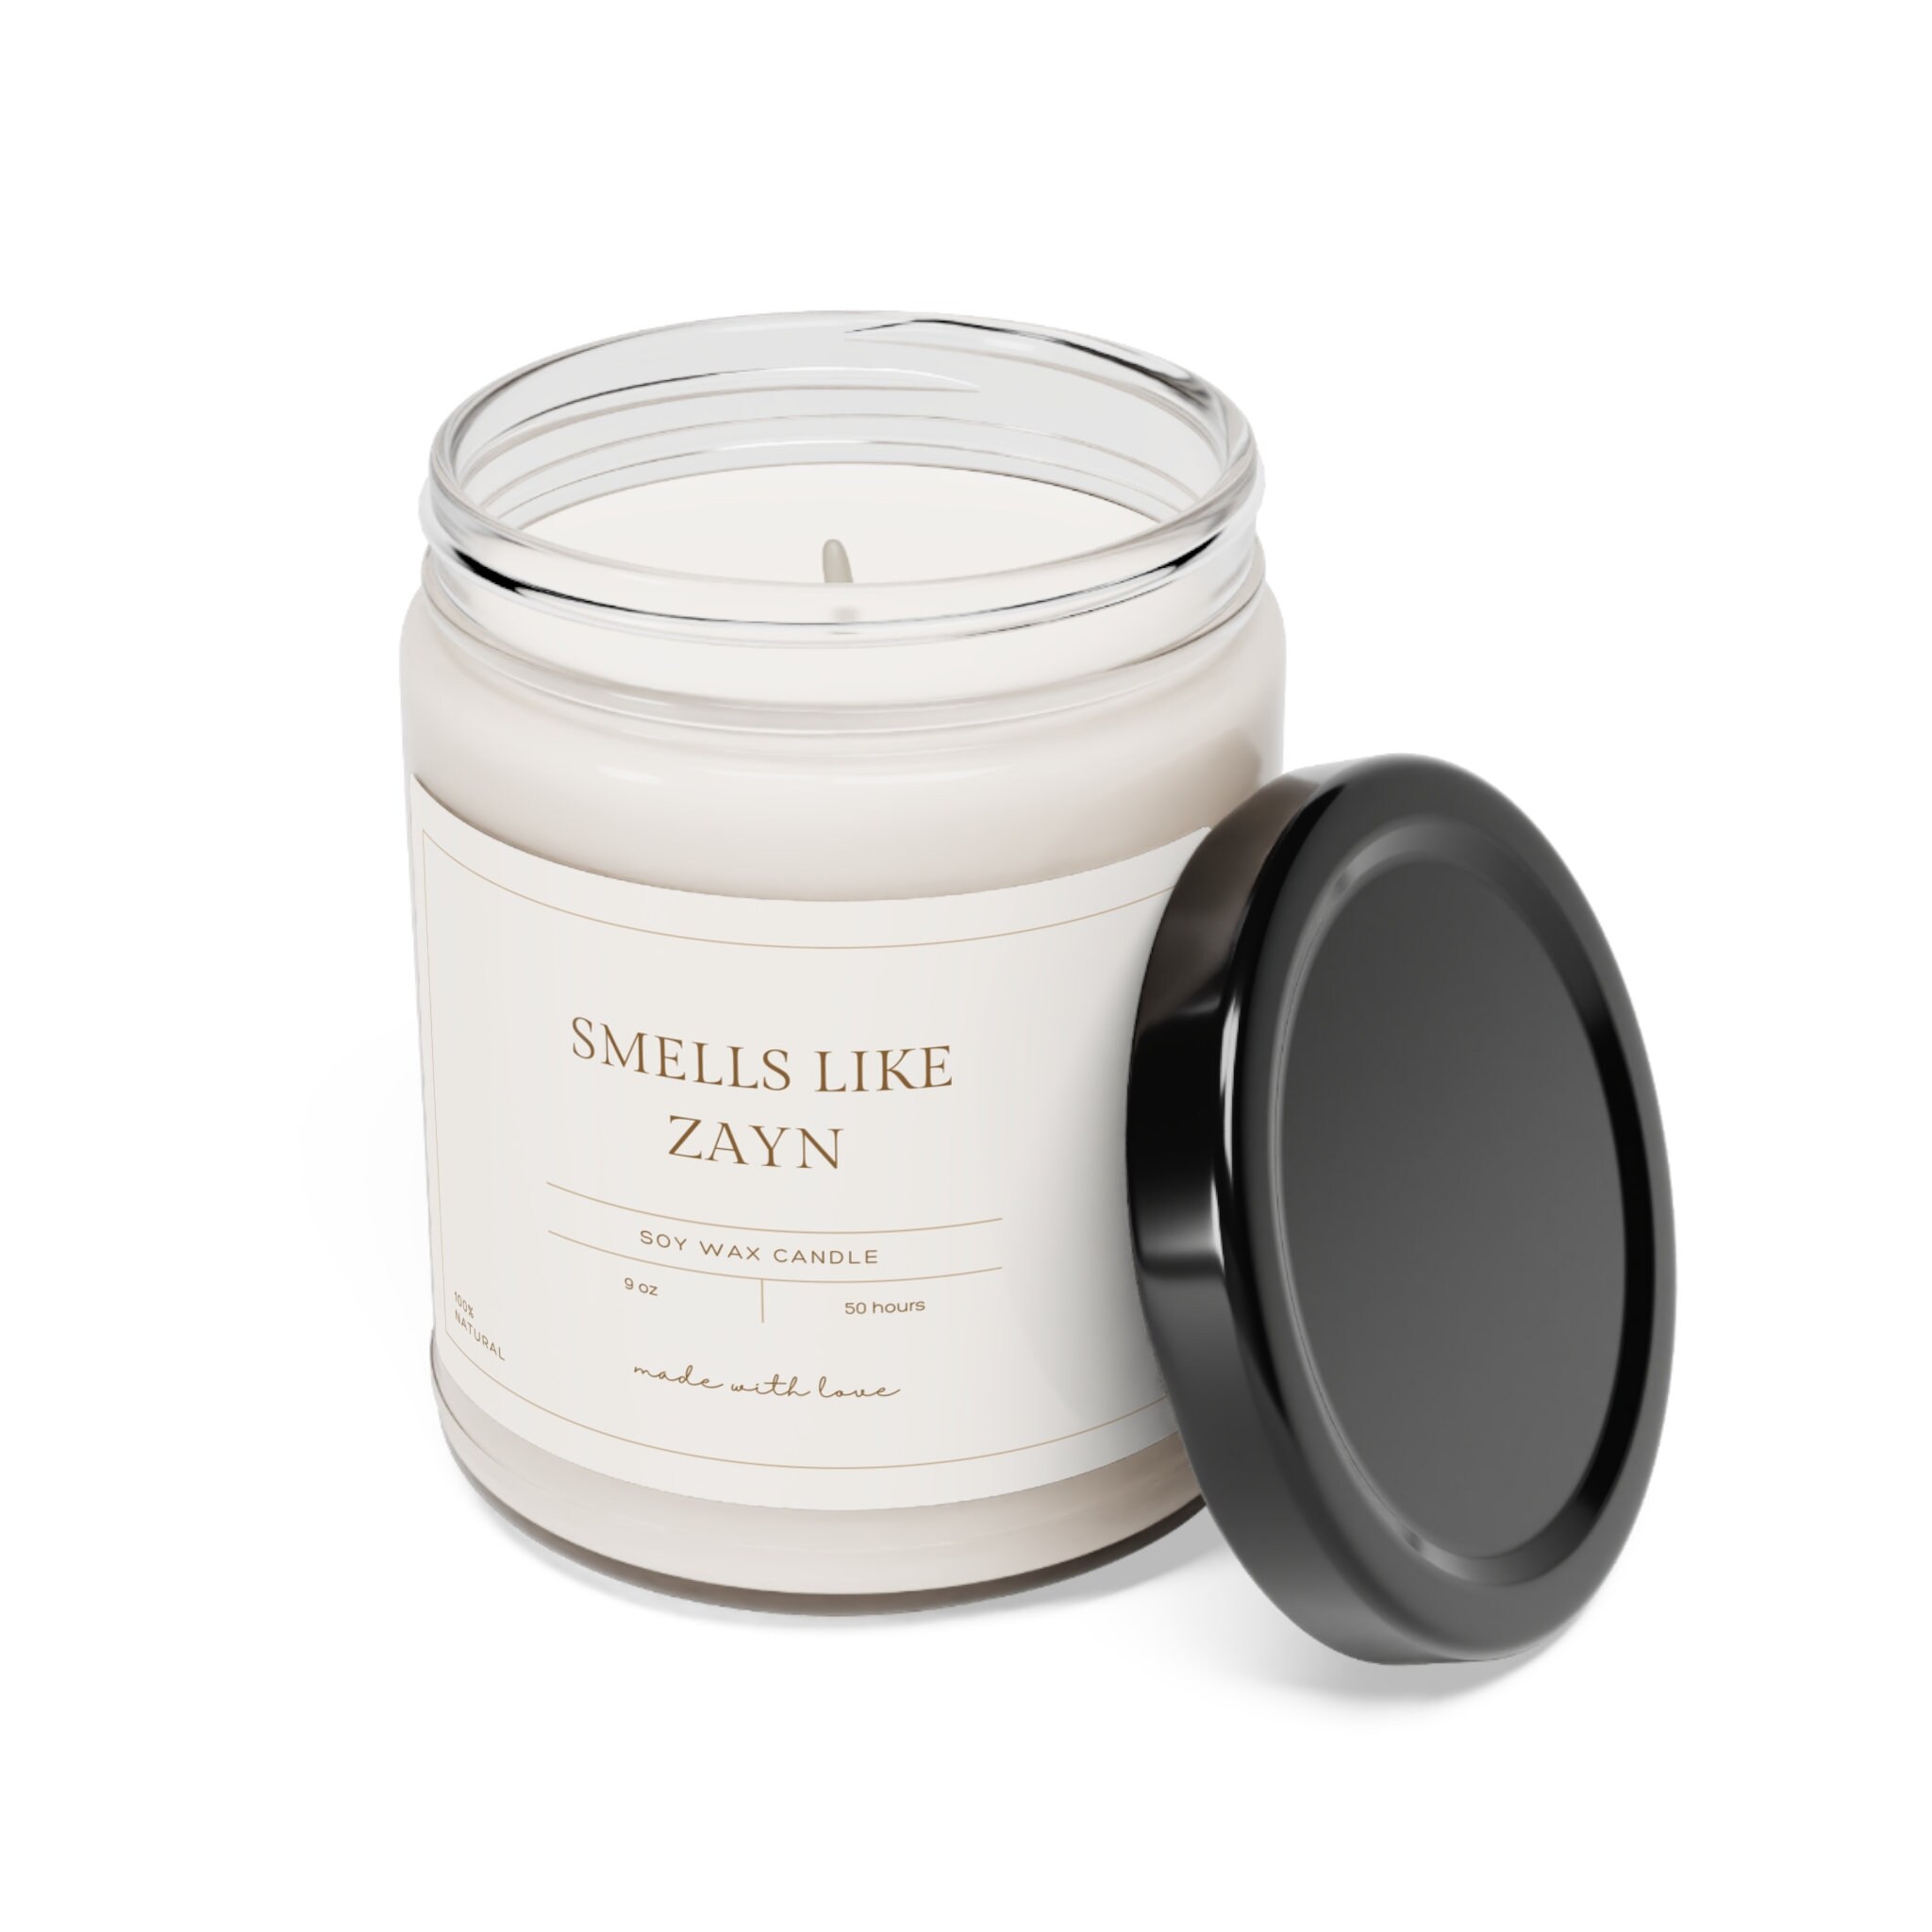 Smells Like Zayn Scented Soy Candle, 9oz Funny Candle Soy Wax